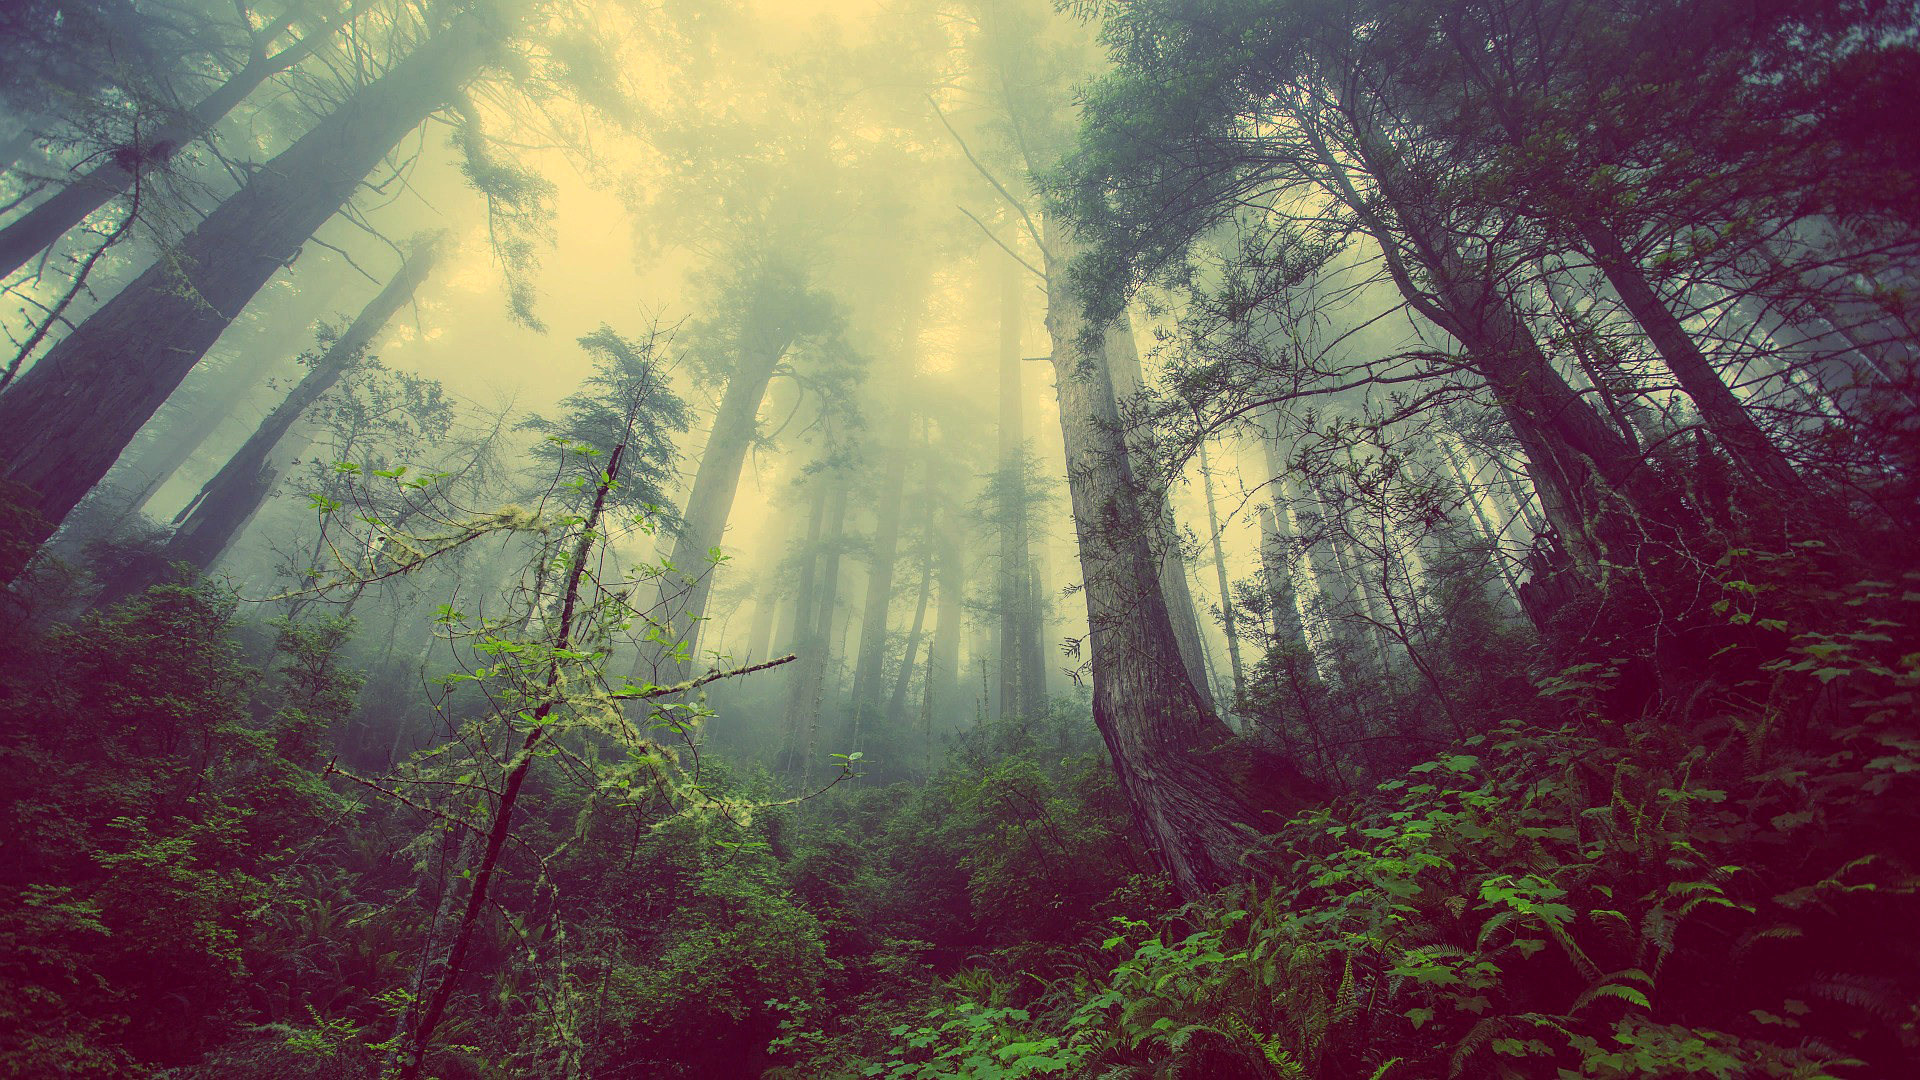 A Gloomy Forest - Best 4k Wallpapers For Pc - HD Wallpaper 